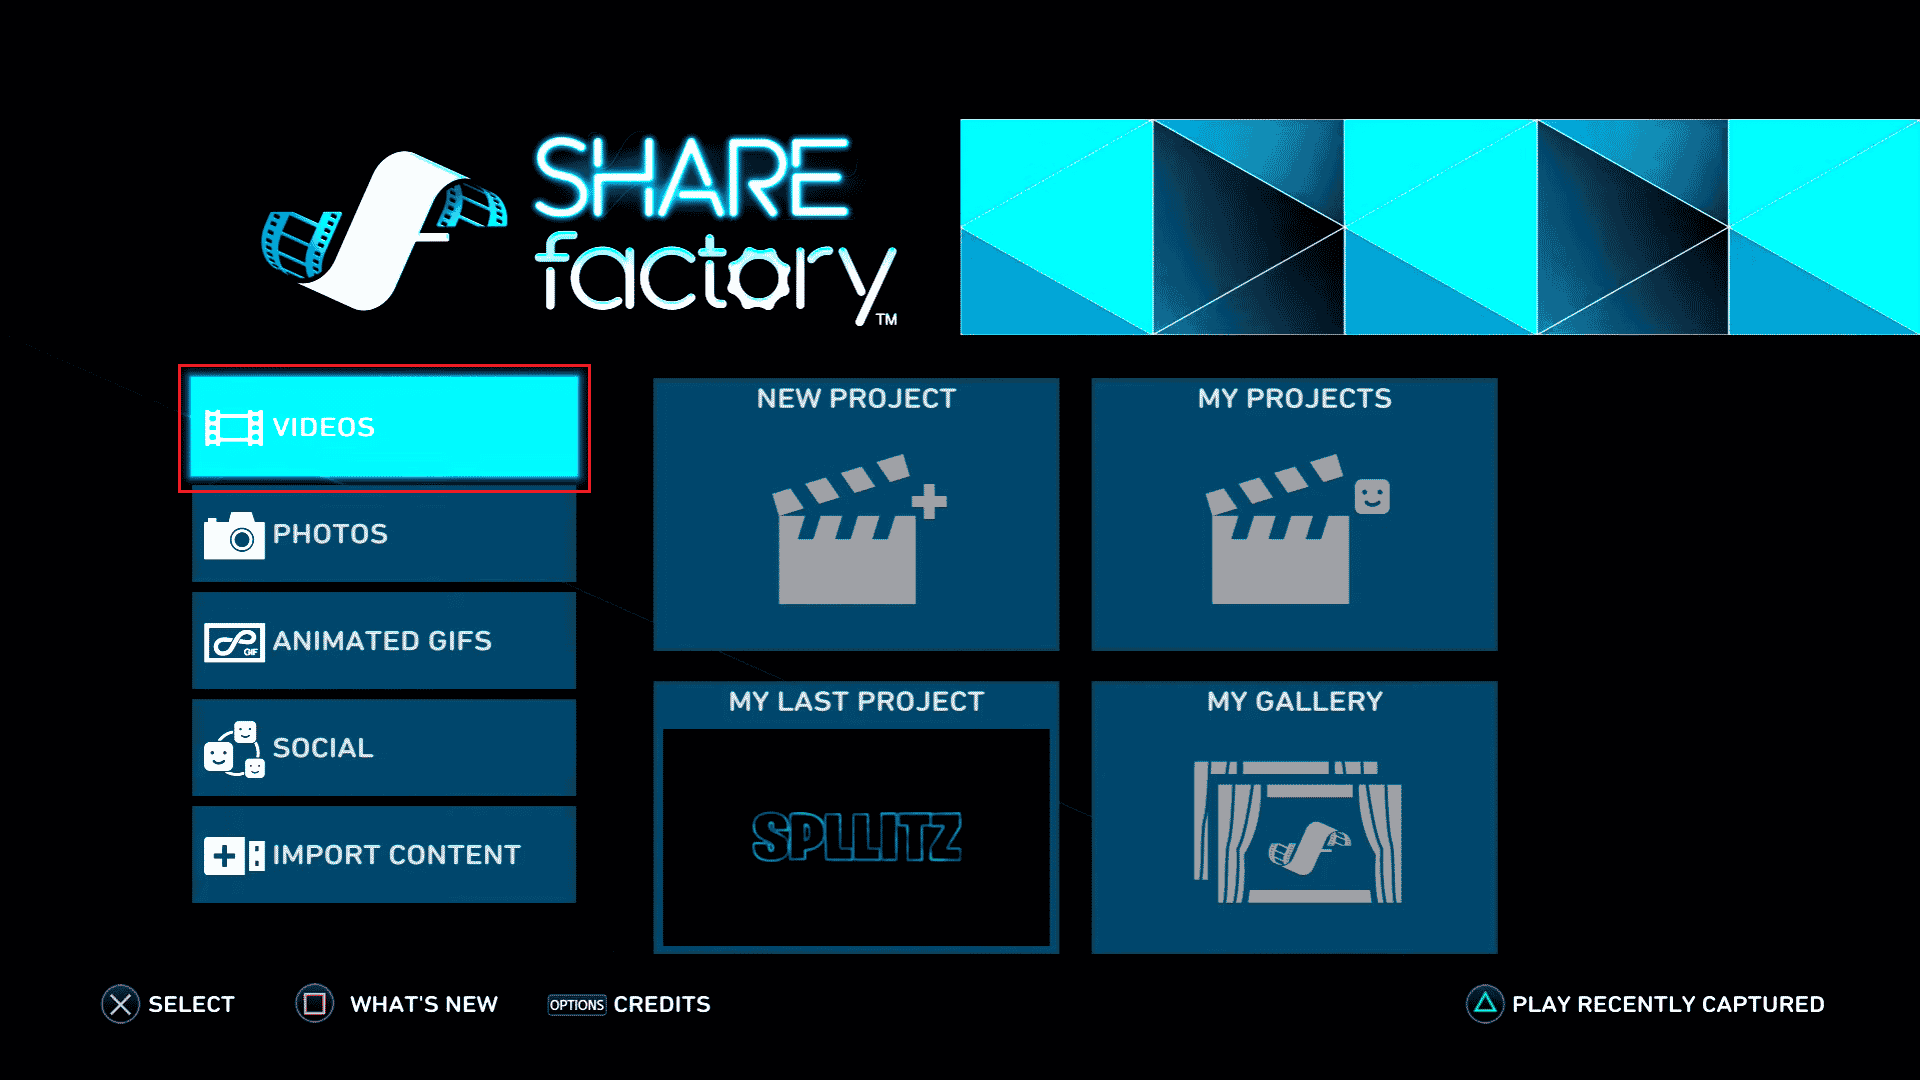 Sharefactory app. Fix PS4 Error CE 42555 1 Issue